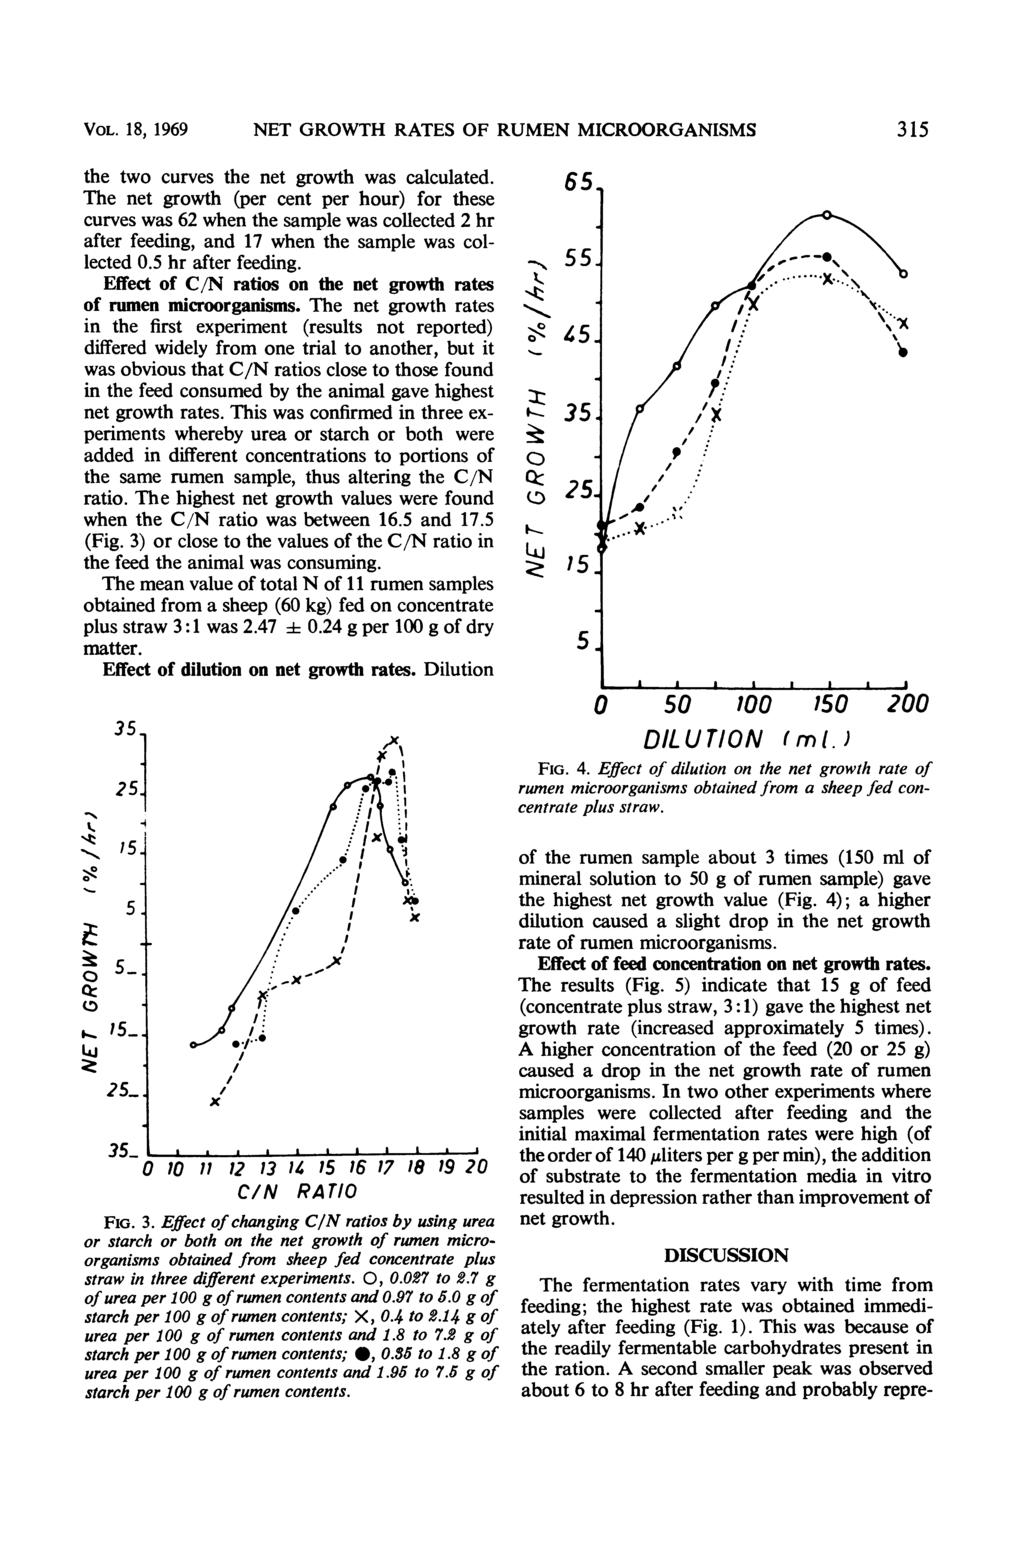 VOL. 18, 1969 NET GROWTH RATES OF RUMEN MICROORGANISMS 315 the two curves the net growth was calculated.